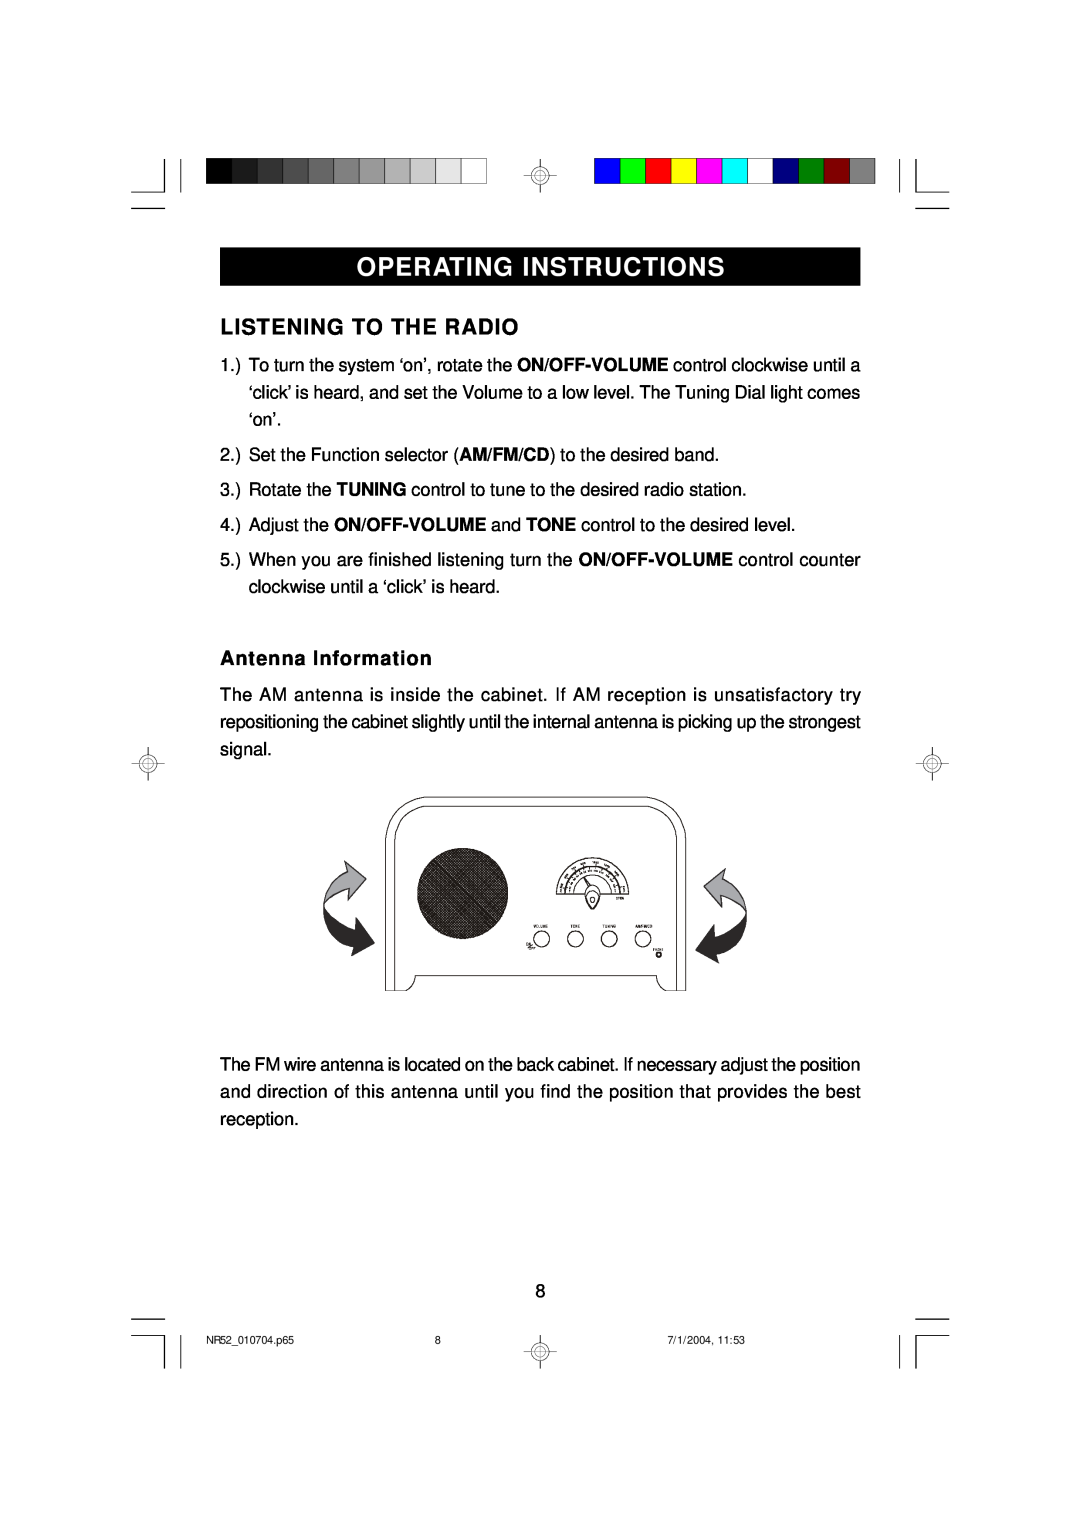 Emerson NR52 owner manual Operating Instructions, Listening To The Radio, Antenna Information 